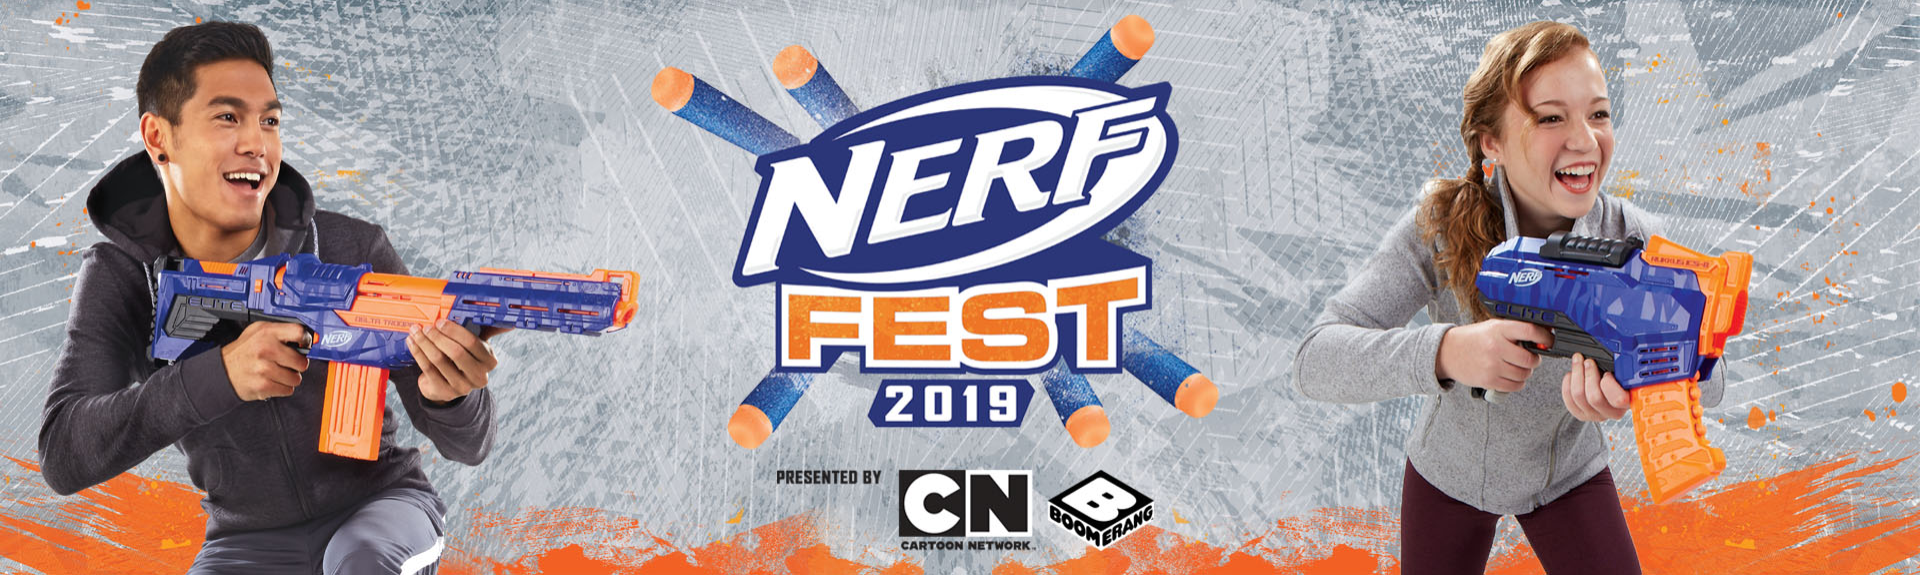 Win a Nerf Fest Obsessed kit with Things to do With Kids and Hasbro